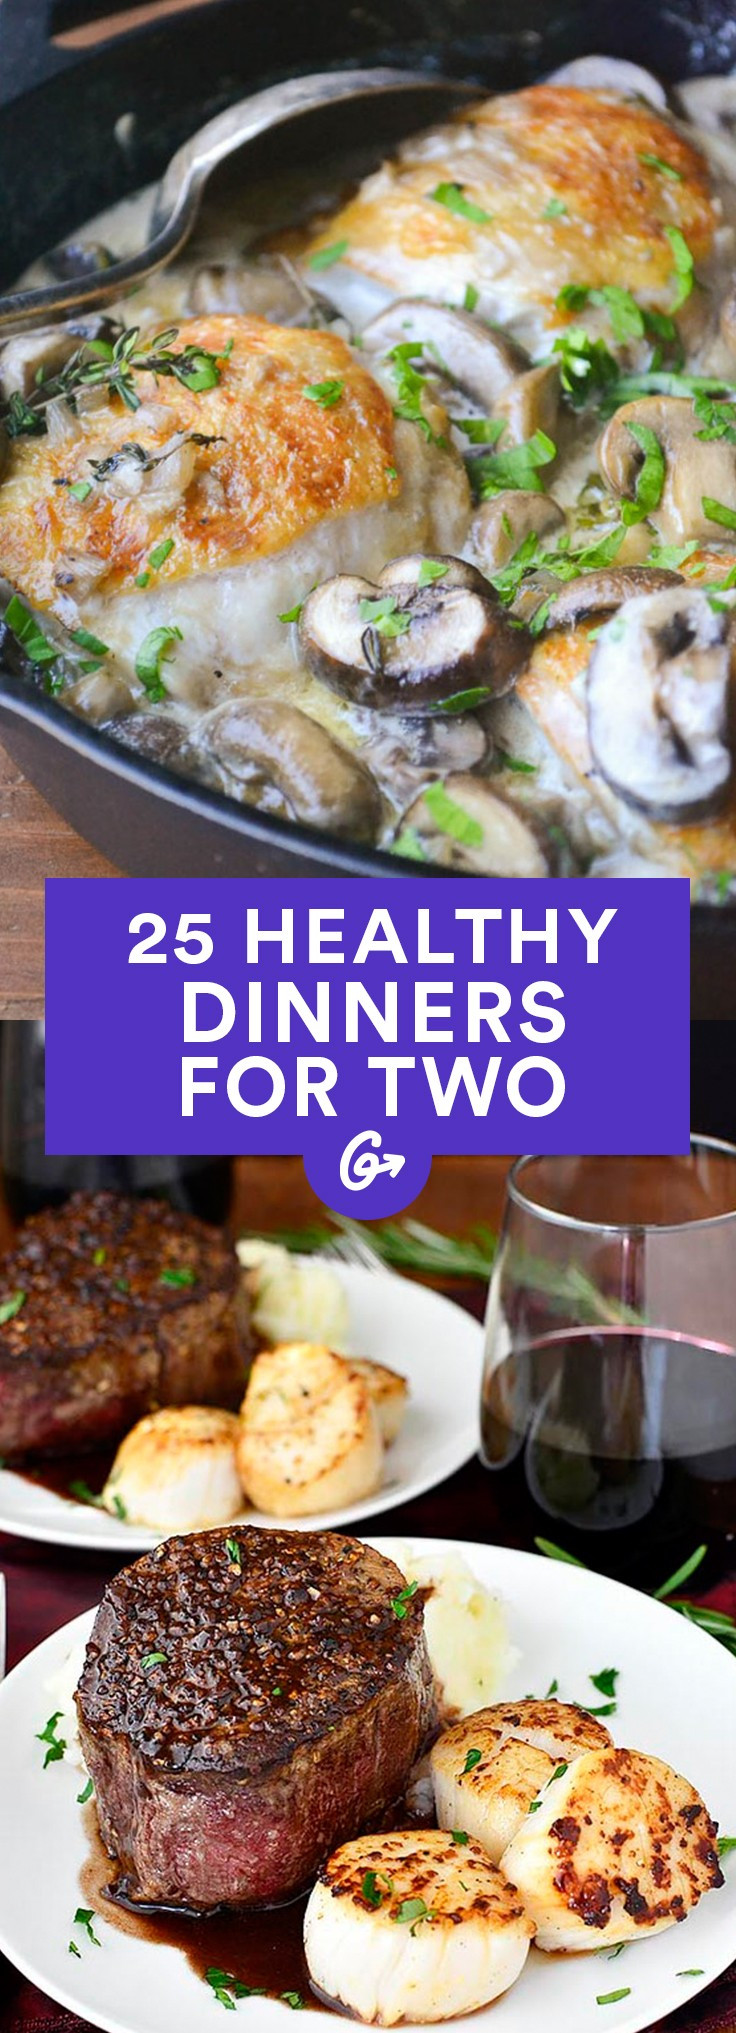 Good Dinners For Two
 Healthy Dinner Recipes for Two